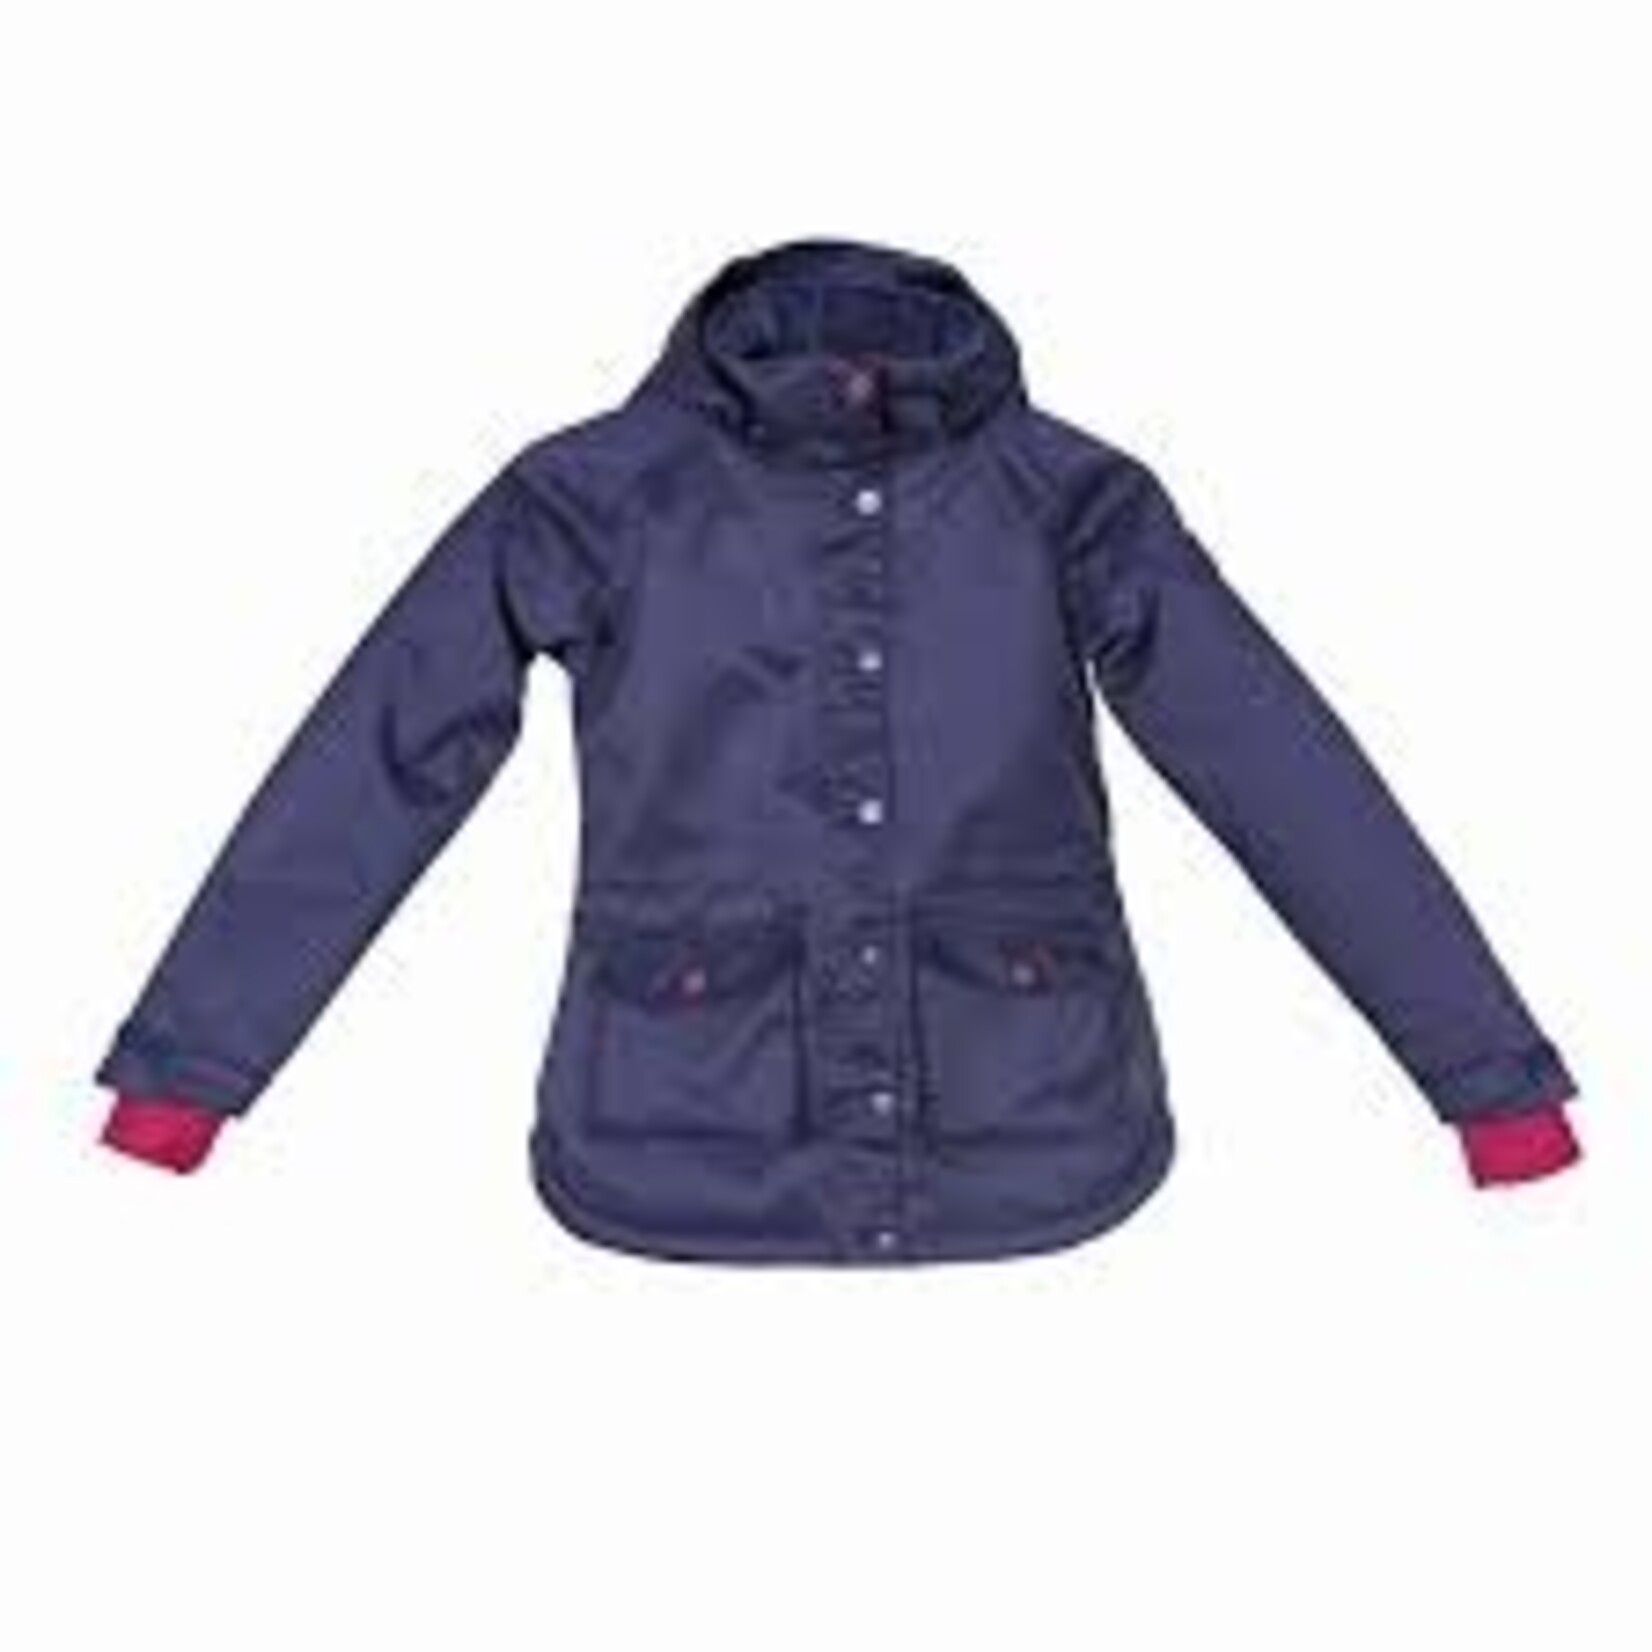 Shires Equestrian Products Aubrion Palisade Waterproof Coat